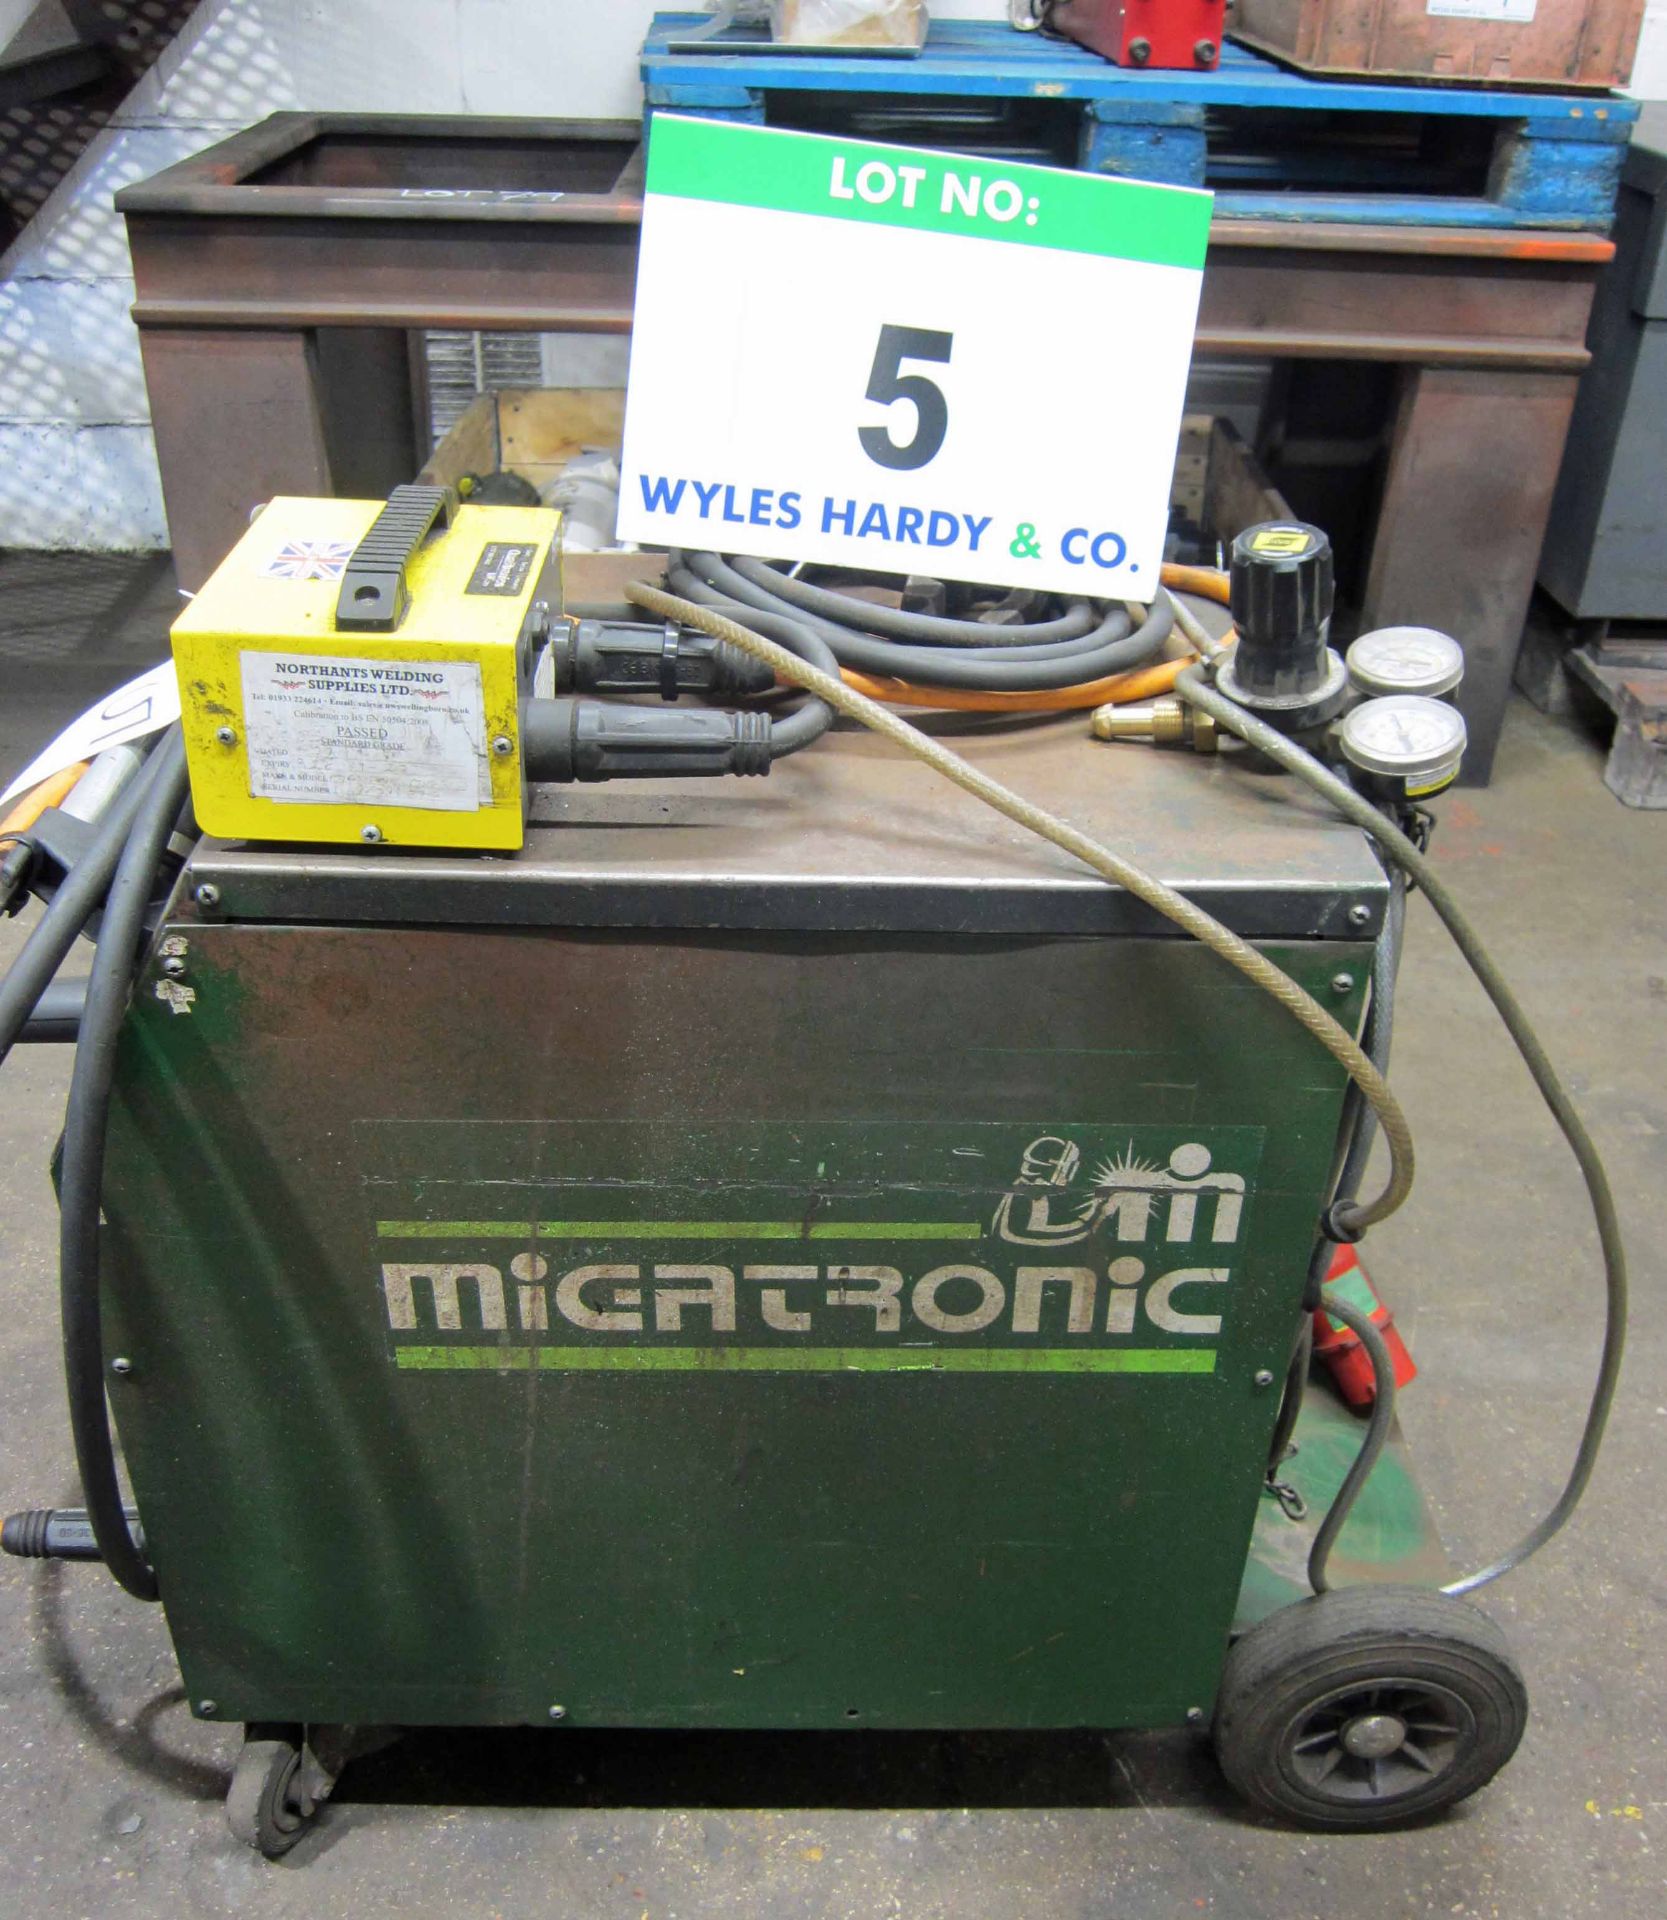 A MIGTRONIC Model Mig 300 Mig Welder complete with QUALITRONICS Voltage and Amp Meters and Gun, - Image 5 of 6